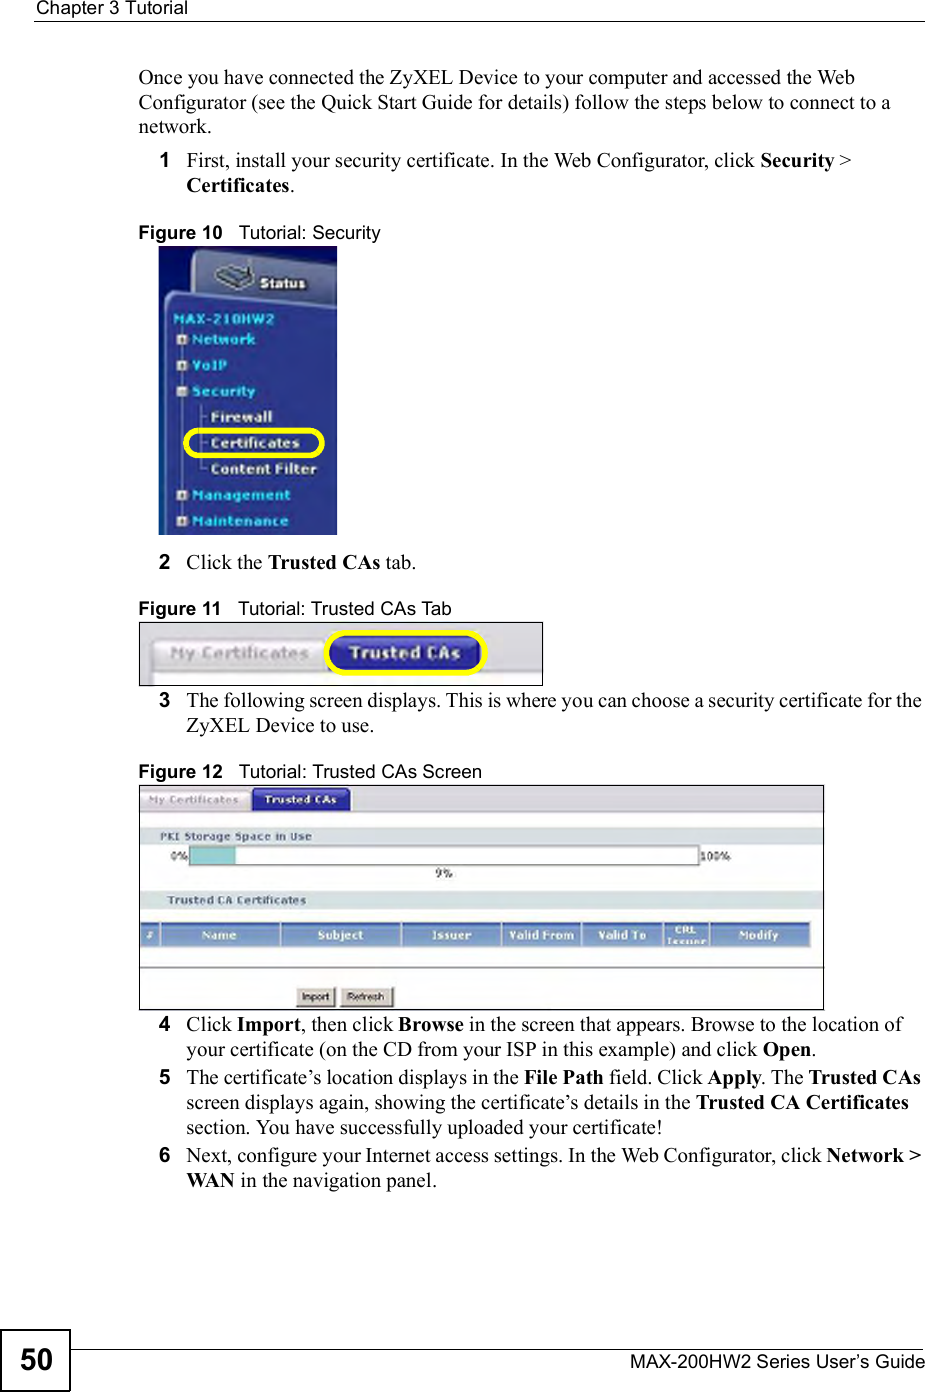 Chapter 3TutorialMAX-200HW2 Series User s Guide50Once you have connected the ZyXEL Device to your computer and accessed the Web Configurator (see the Quick Start Guide for details) follow the steps below to connect to a network.1First, install your security certificate. In the Web Configurator, click Security &gt; Certificates.Figure 10   Tutorial: Security2Click the Trusted CAs tab.Figure 11   Tutorial: Trusted CAs Tab3The following screen displays. This is where you can choose a security certificate for the ZyXEL Device to use. Figure 12   Tutorial: Trusted CAs Screen4Click Import, then click Browse in the screen that appears. Browse to the location of your certificate (on the CD from your ISP in this example) and click Open.5The certificate!s location displays in the File Path field. Click Apply. The Trusted CAsscreen displays again, showing the certificate!s details in the Trusted CA Certificatessection. You have successfully uploaded your certificate!6Next, configure your Internet access settings. In the Web Configurator, click Network &gt; WAN in the navigation panel.